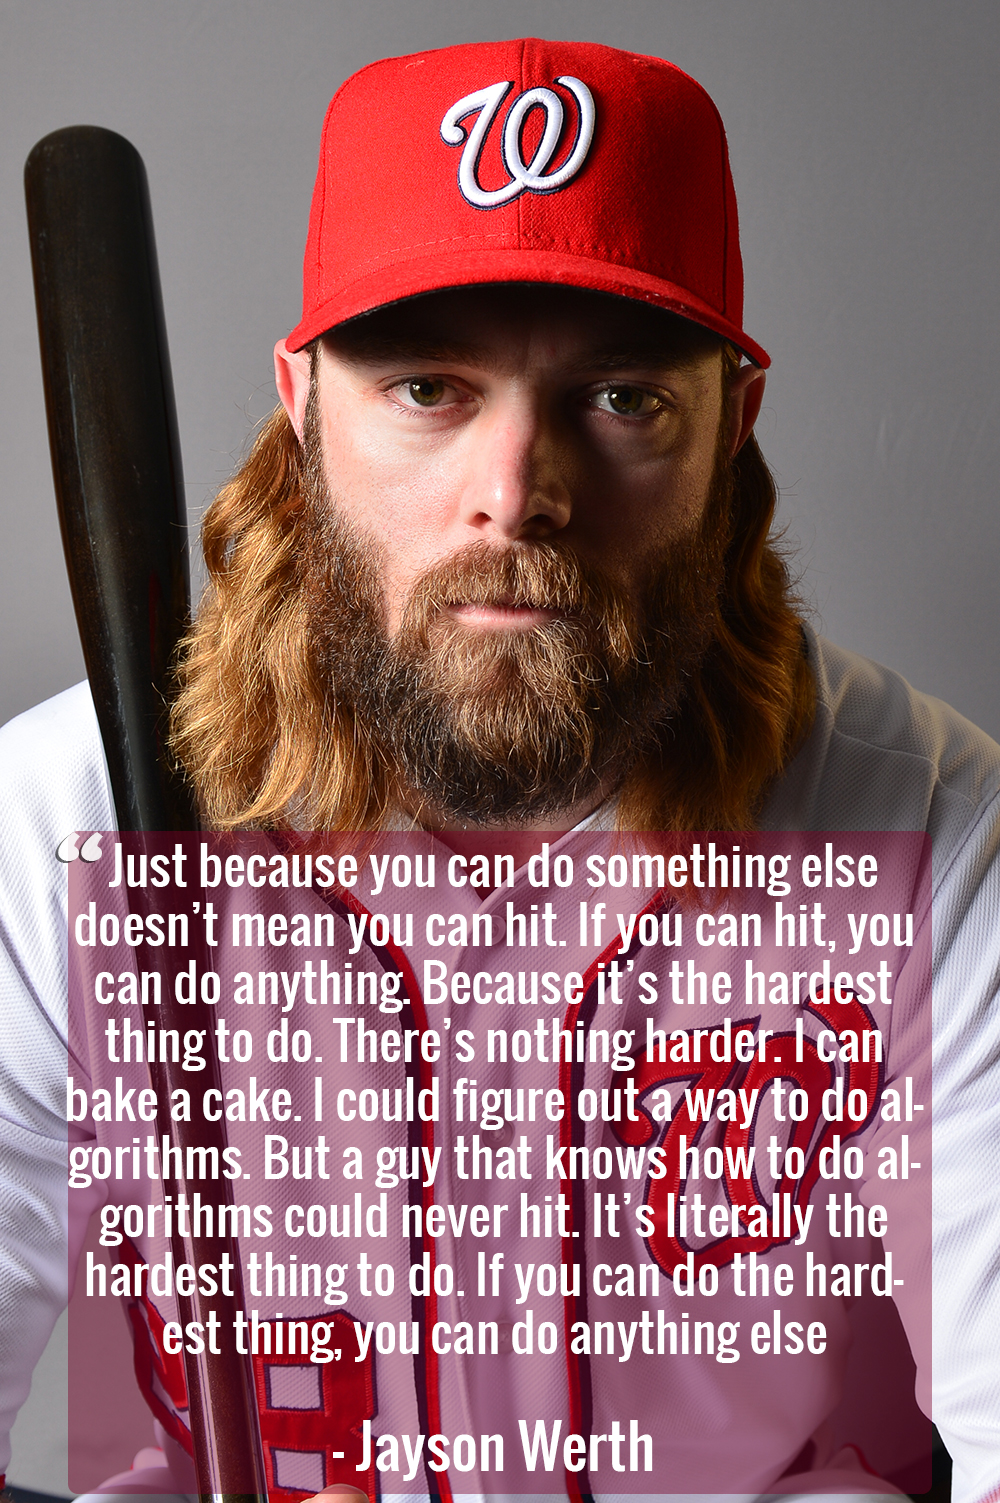 Jayson Werth's biggest fan raises money for kids with cancer